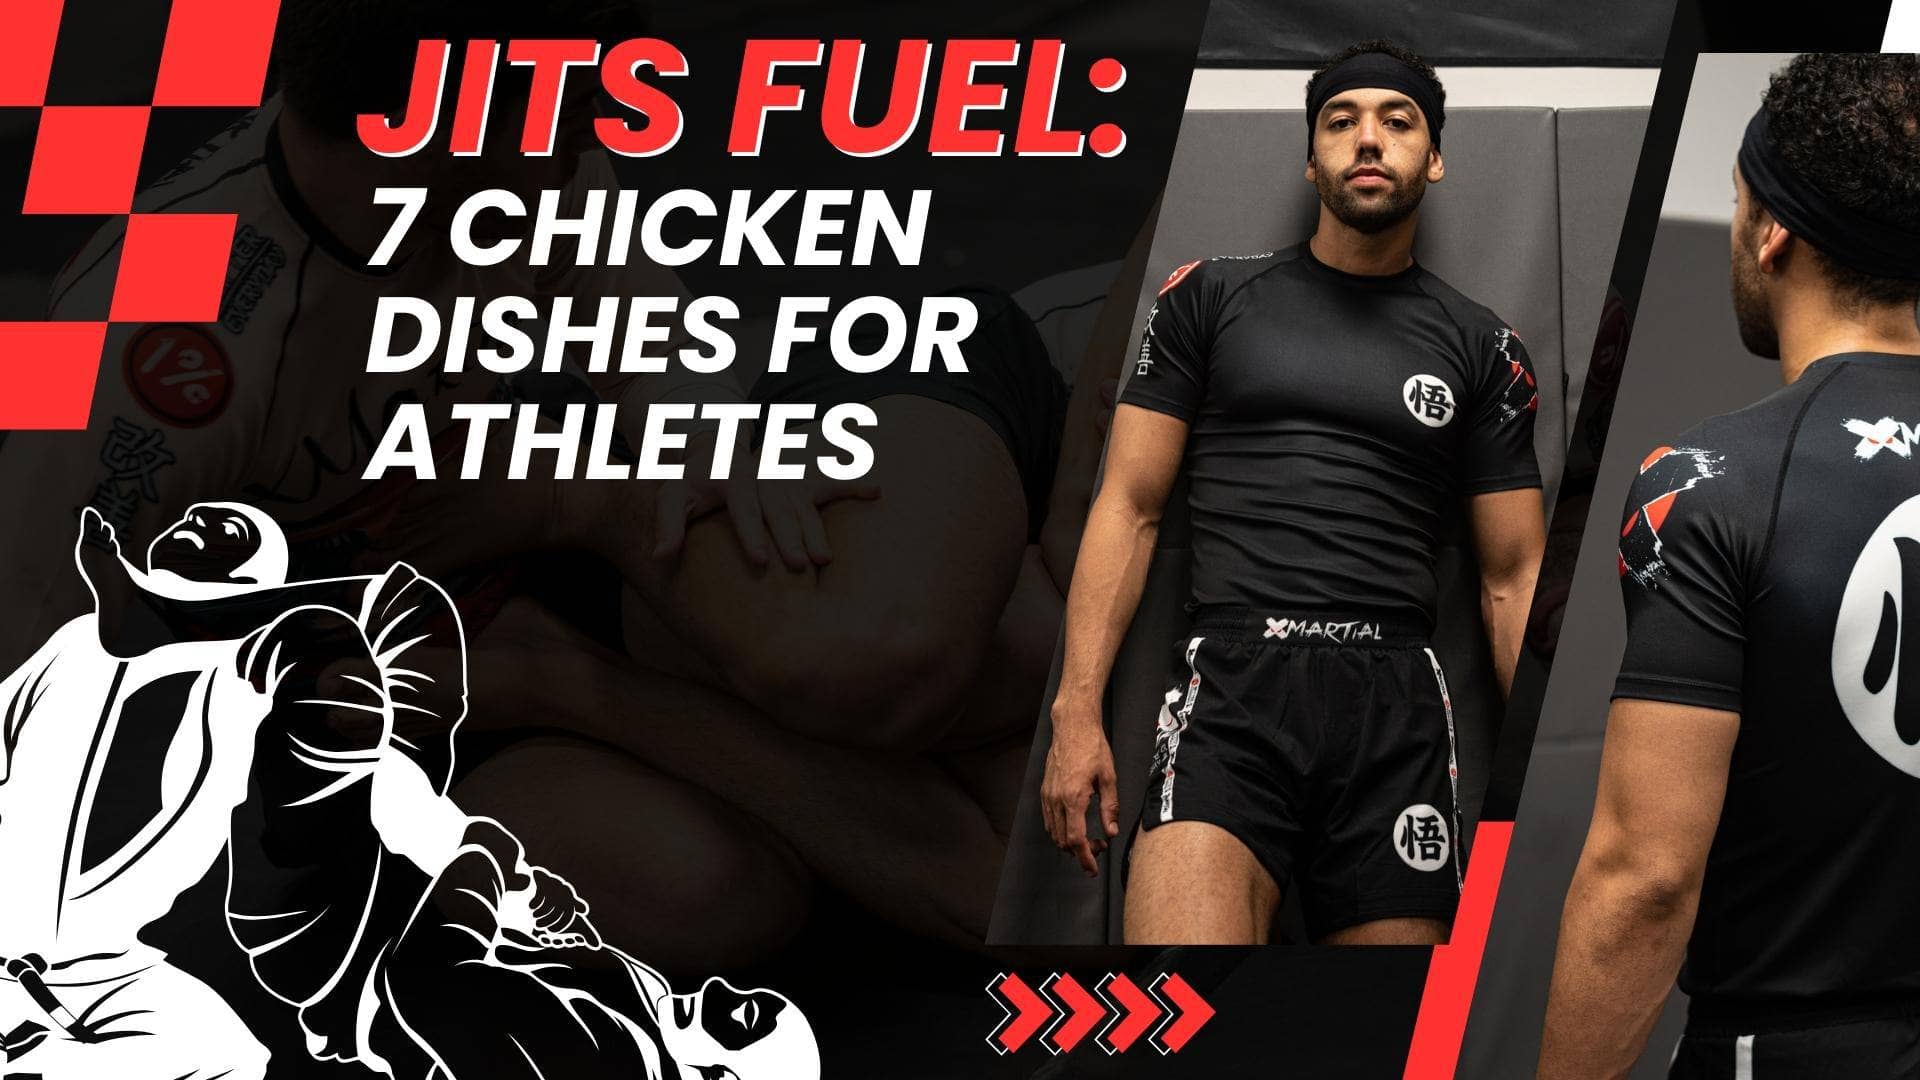 Jits Fuel 7 Chicken Dishes for Athletes XMARTIAL